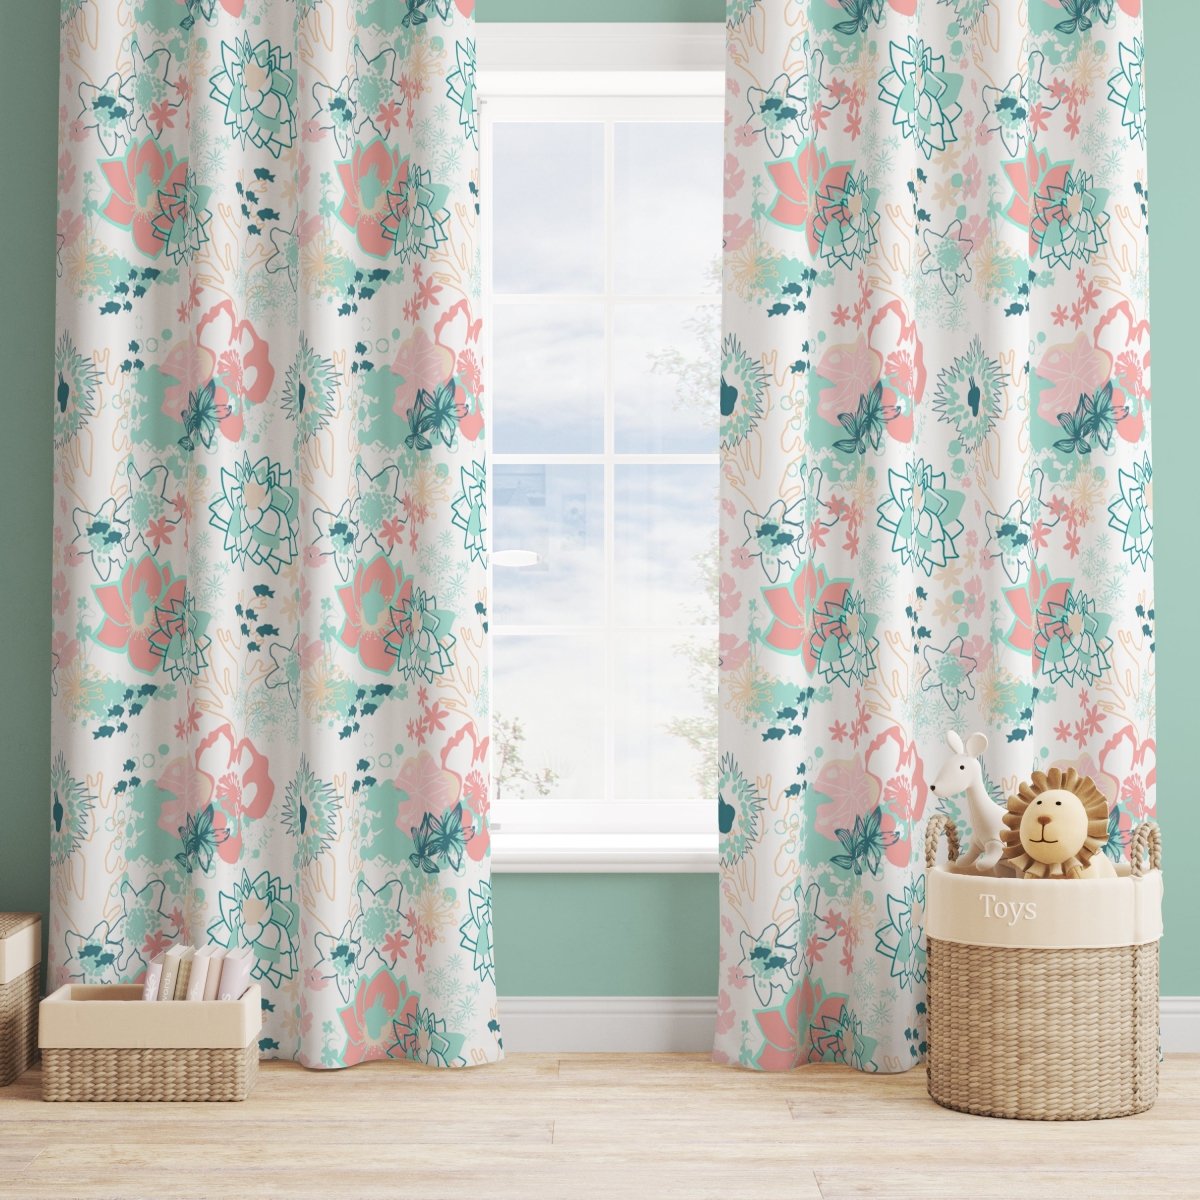 Coral Waves Curtain Panel - Coral Waves, gender_girl, Theme_Floral